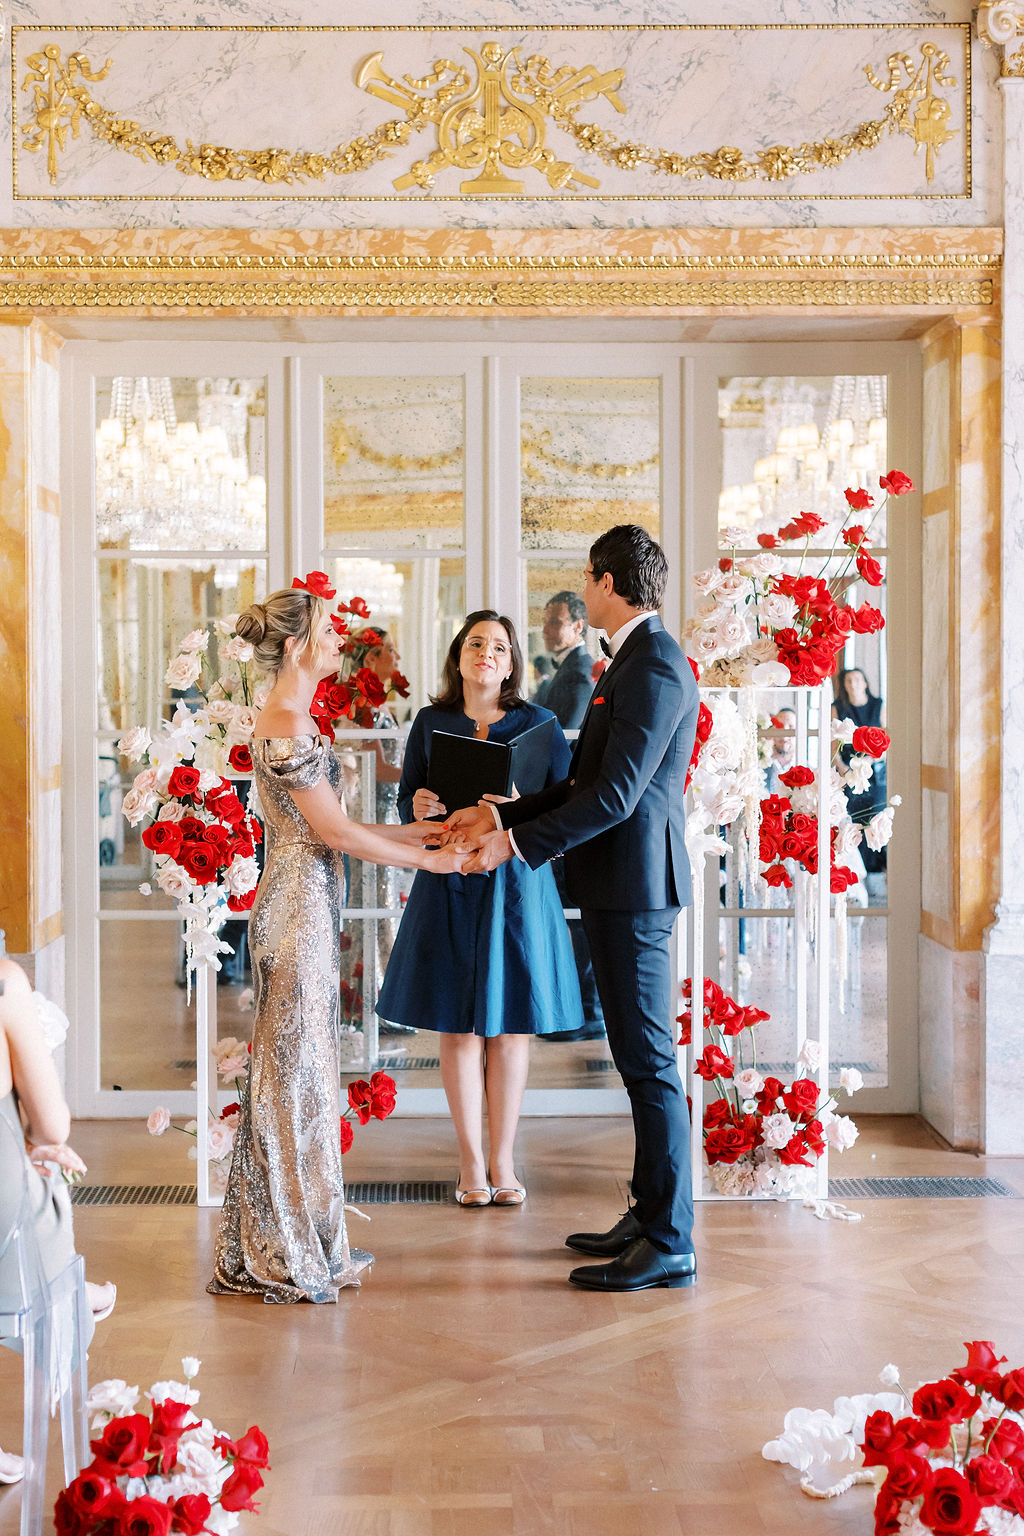 Romantic gold and white wedding ceremony in France 